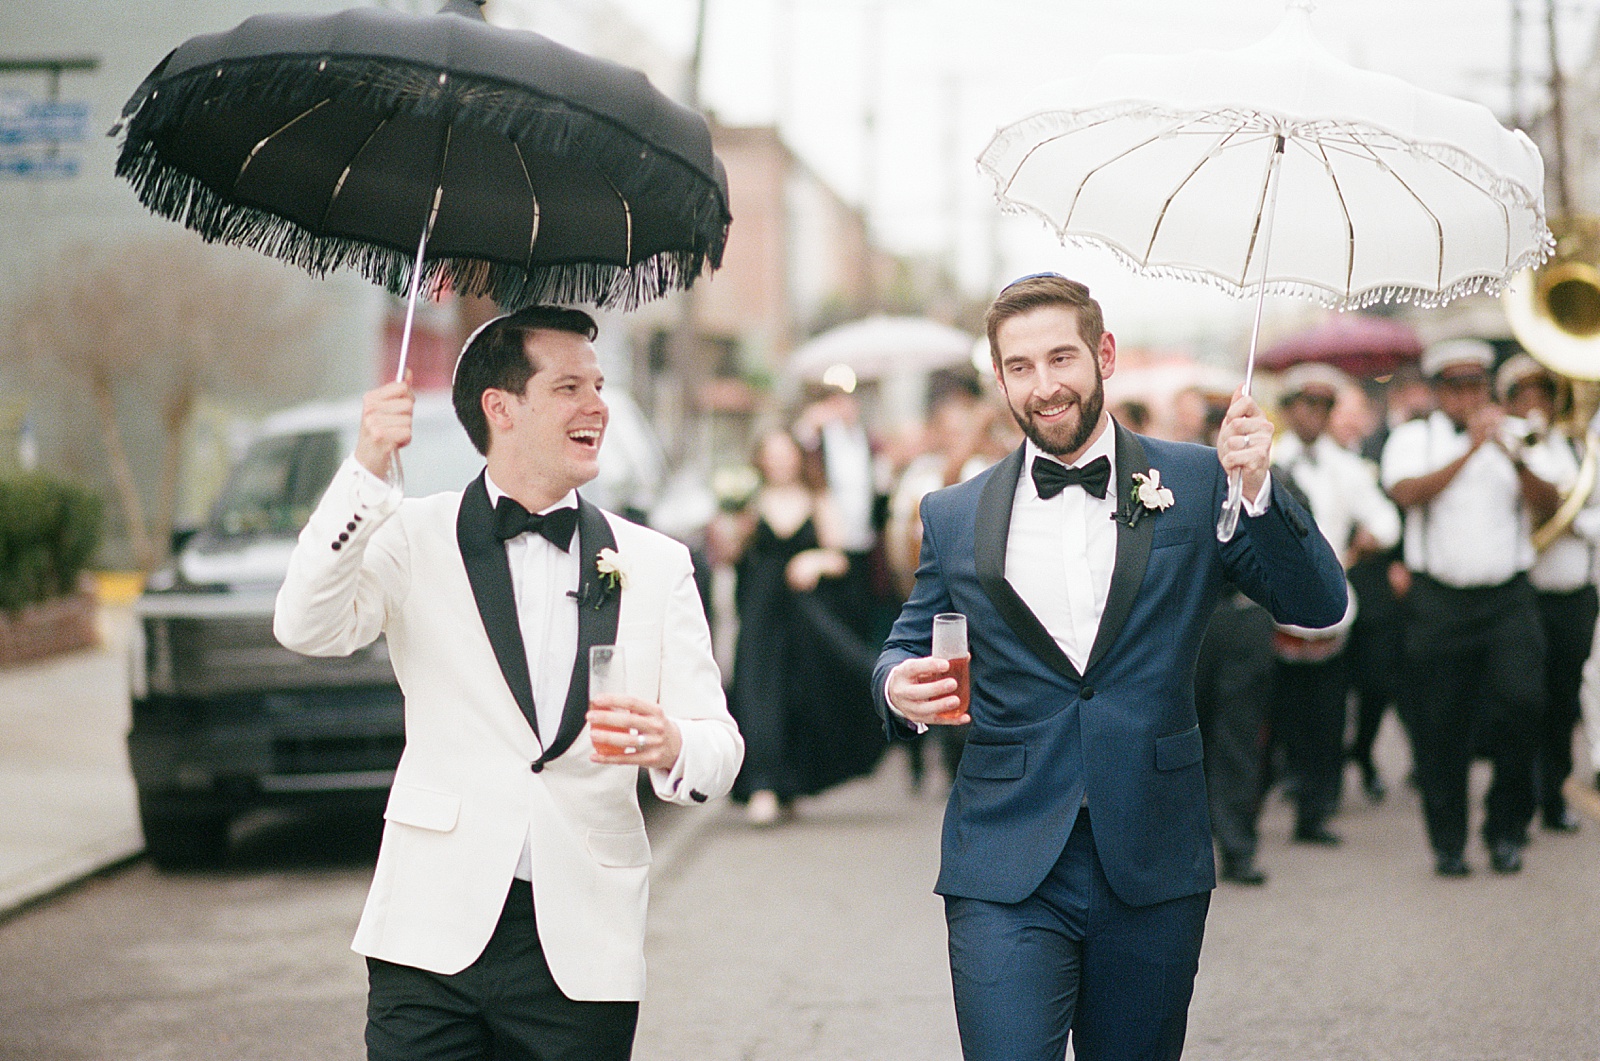 Two grooms wave wedding umbrellas in wedding photography on film.